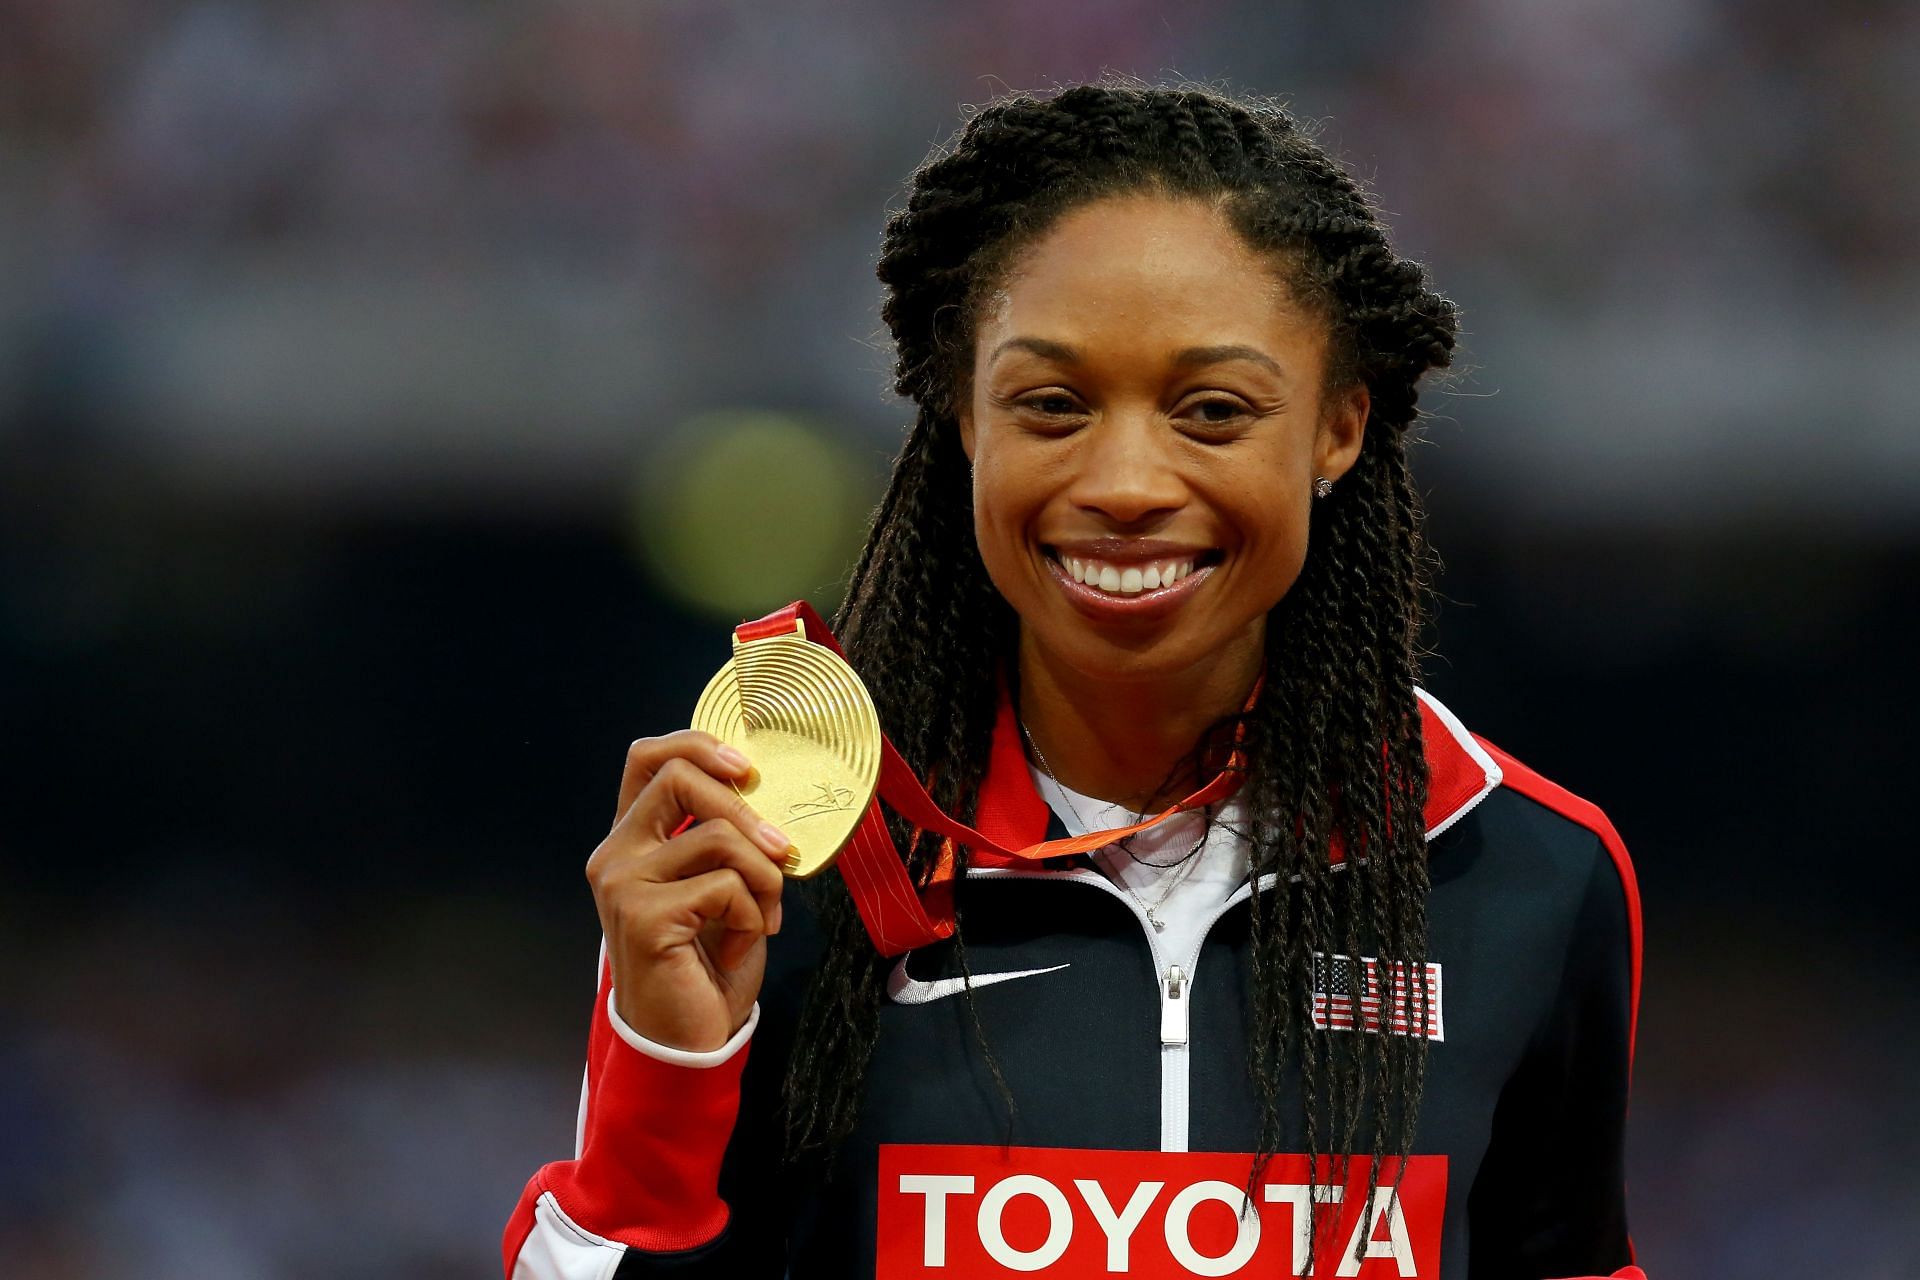 Gold medalist Allyson Felix of the United States poses on the podium during the medal ceremony for the Women&#039;s 400-meter final during day seven of the 15th IAAF World Athletics Championships at Beijing National Stadium on August 28, 2015, in Beijing, China. (Photo by Alexander Hassenstein/Getty Images for IAAF)